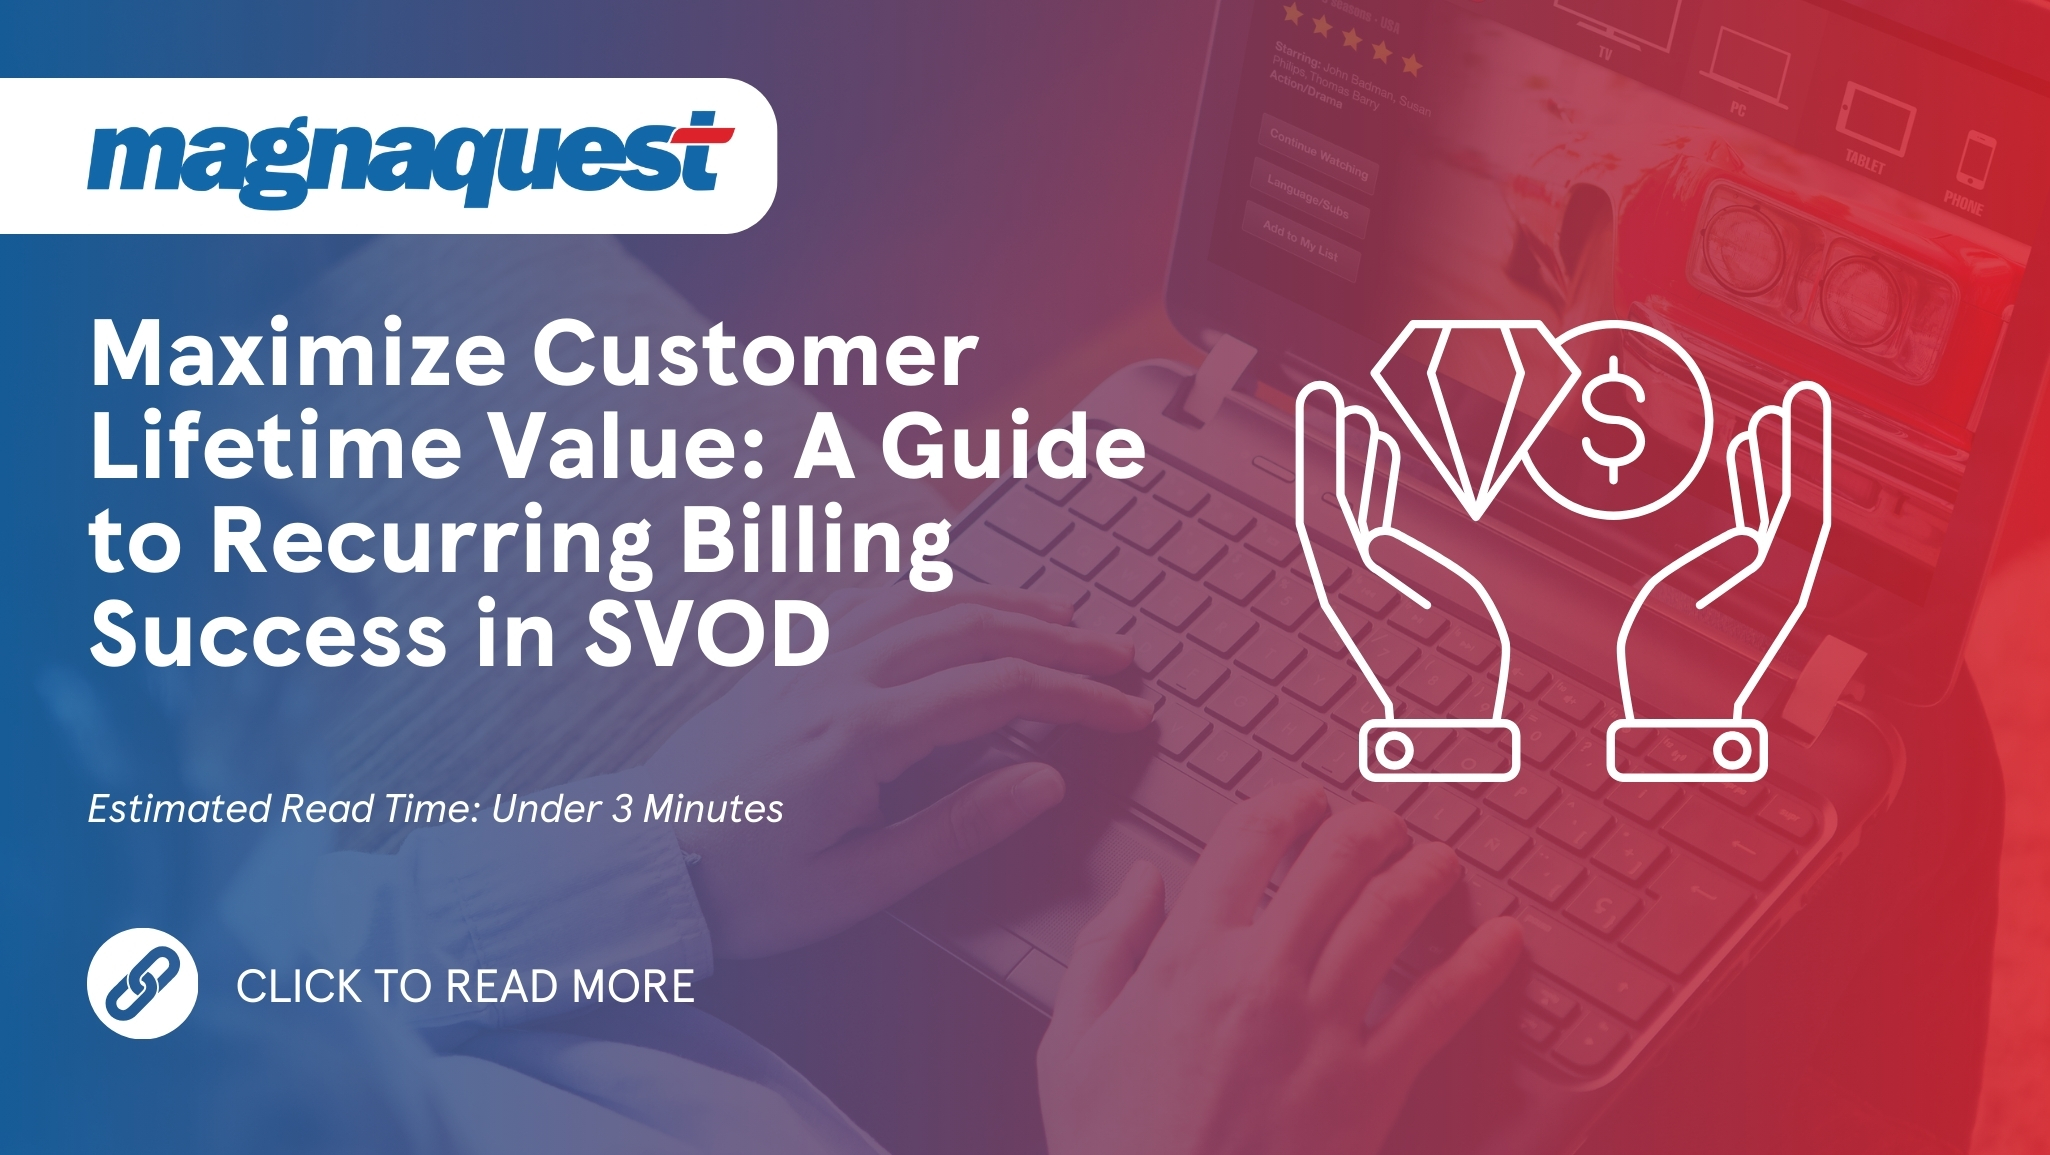 http://magnaquest.com/wp-content/uploads/2024/06/WB-Maximize-Customer-Lifetime-Value-A-Guide-to-Recurring-Billing-Success-in-SVOD.jpg